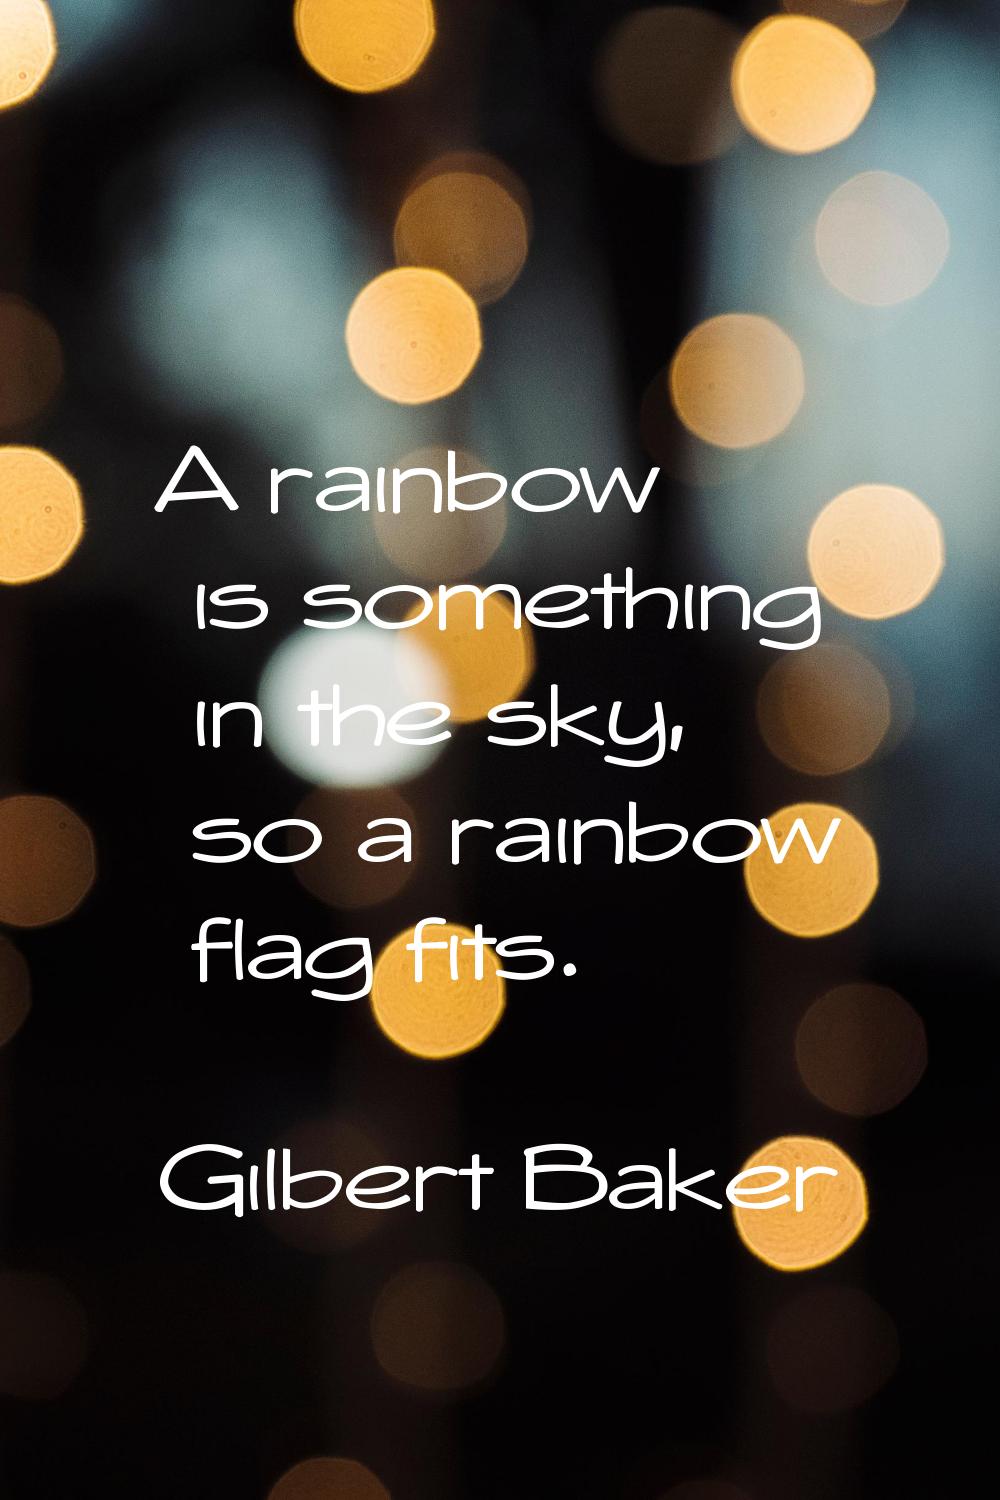 A rainbow is something in the sky, so a rainbow flag fits.